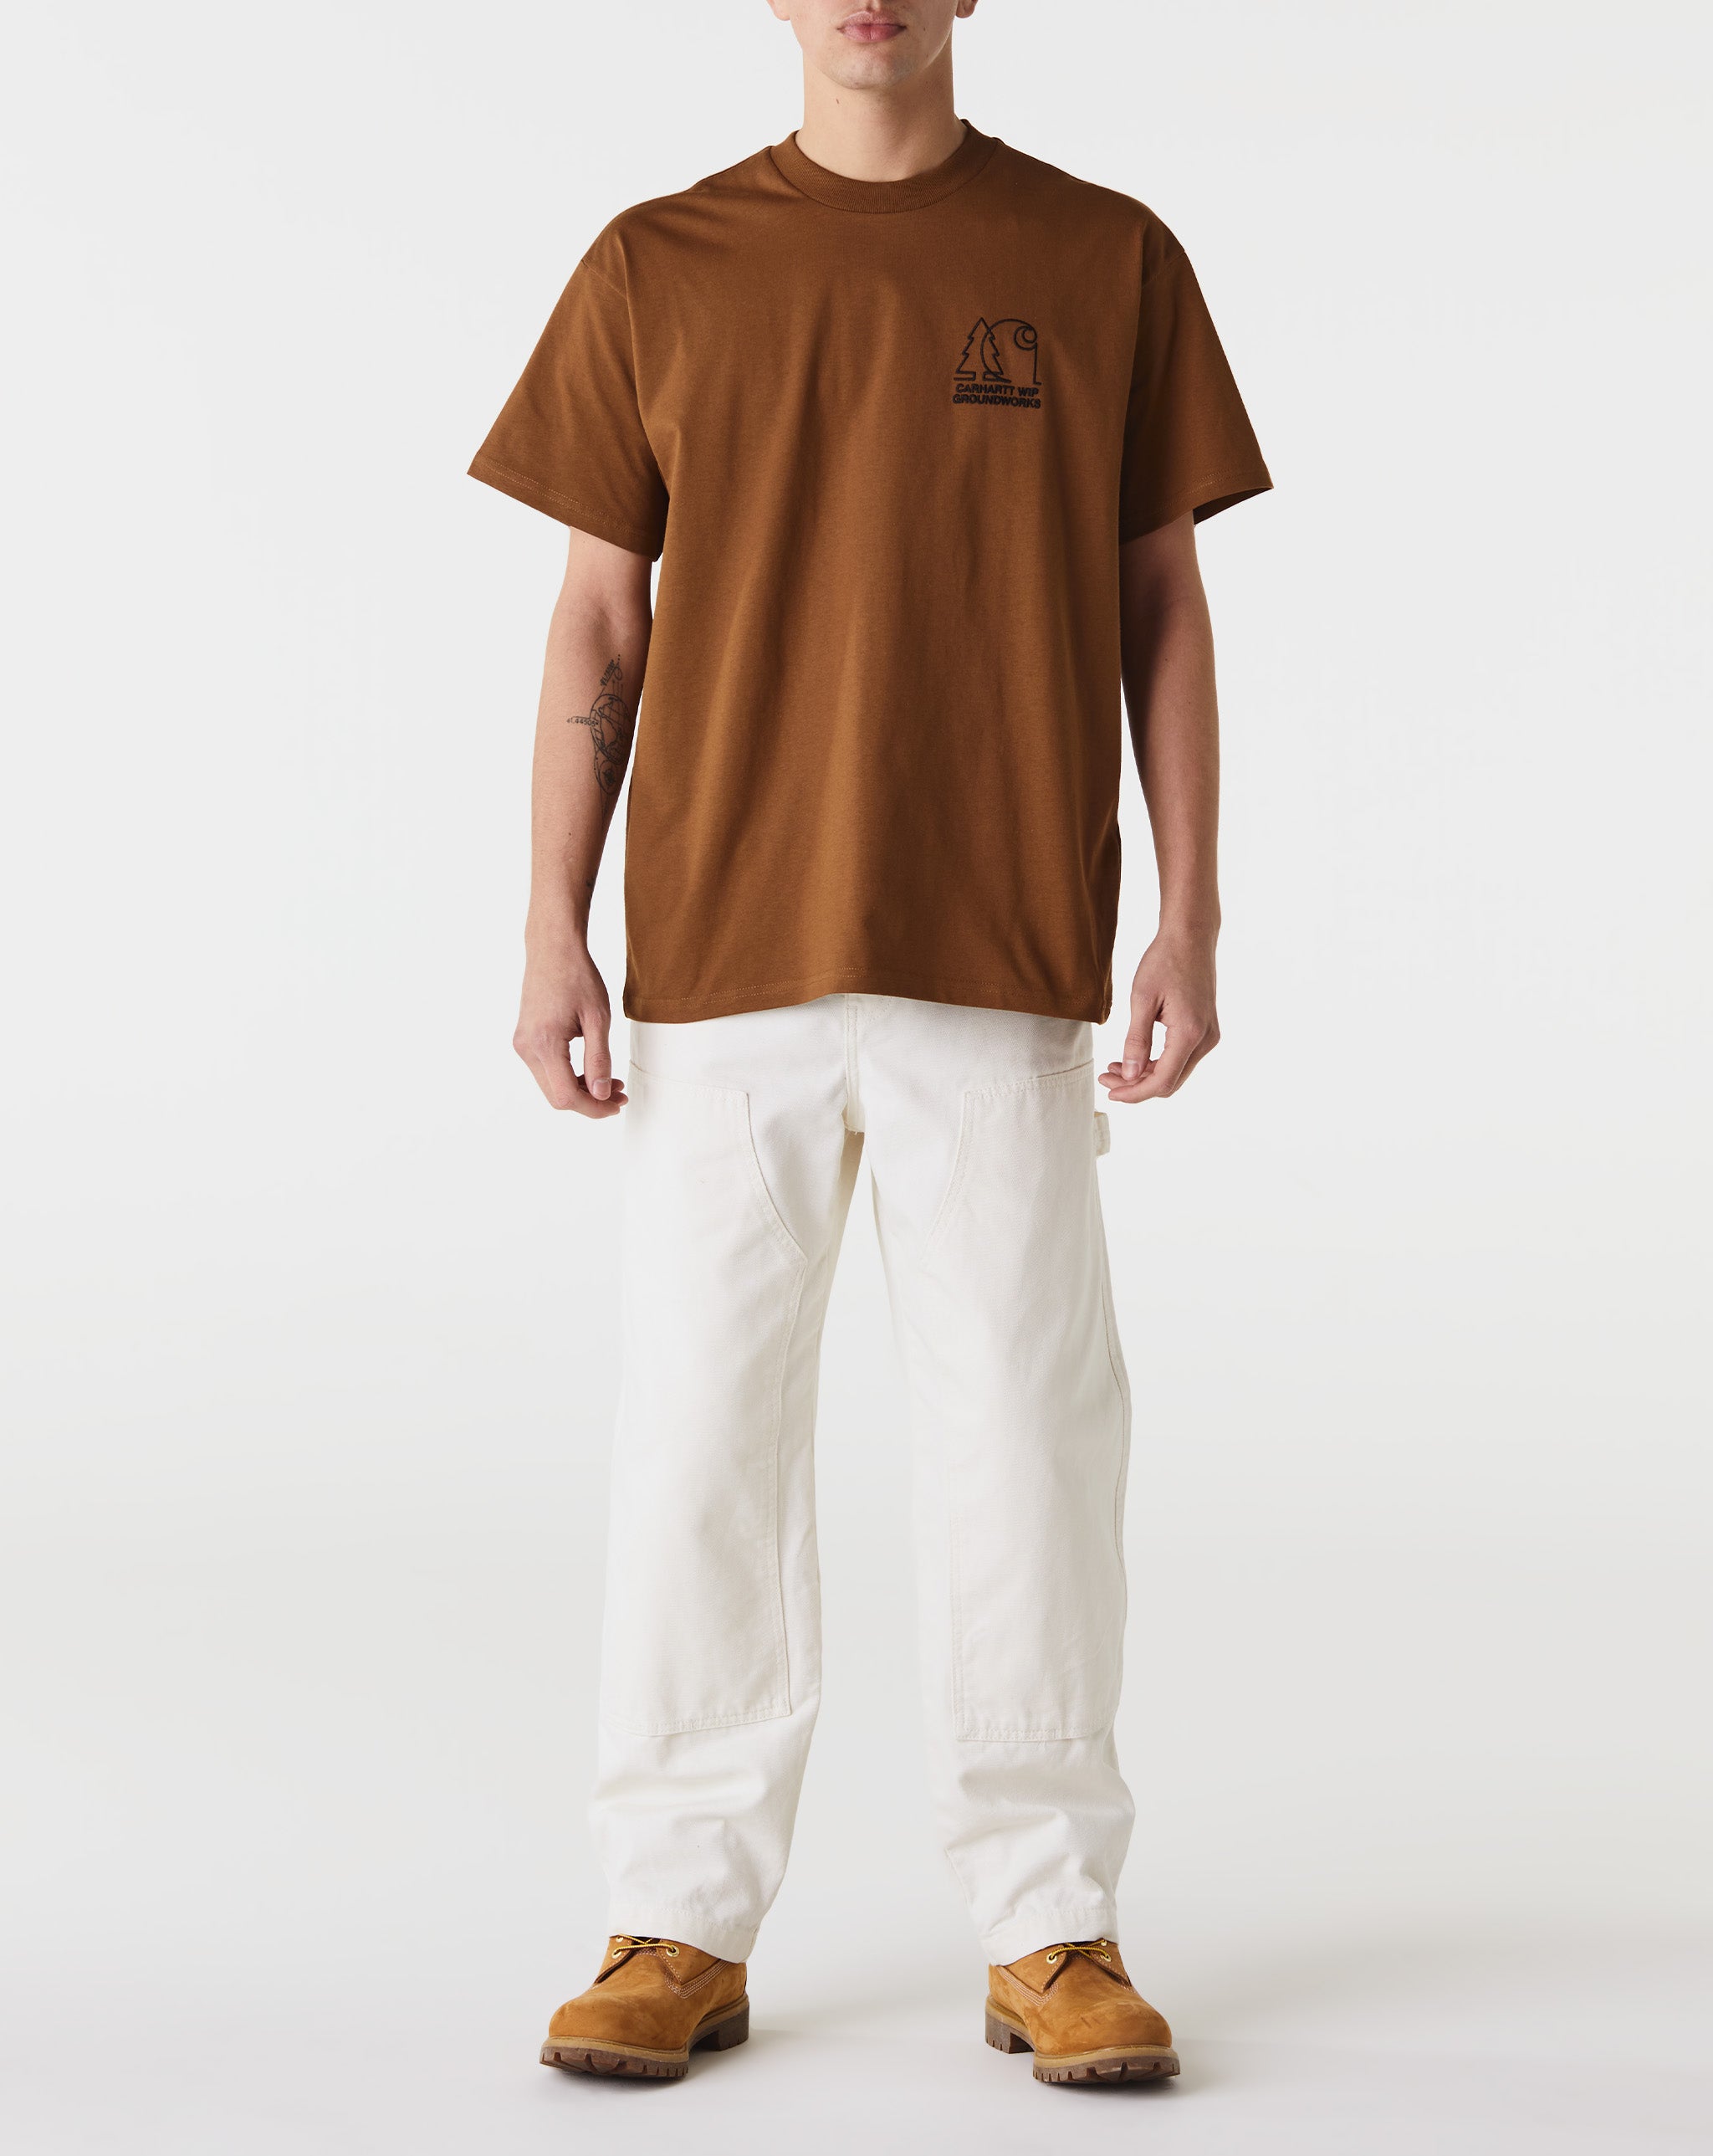 Carhartt WIP Groundworks T-Shirt - Rule of Next Apparel